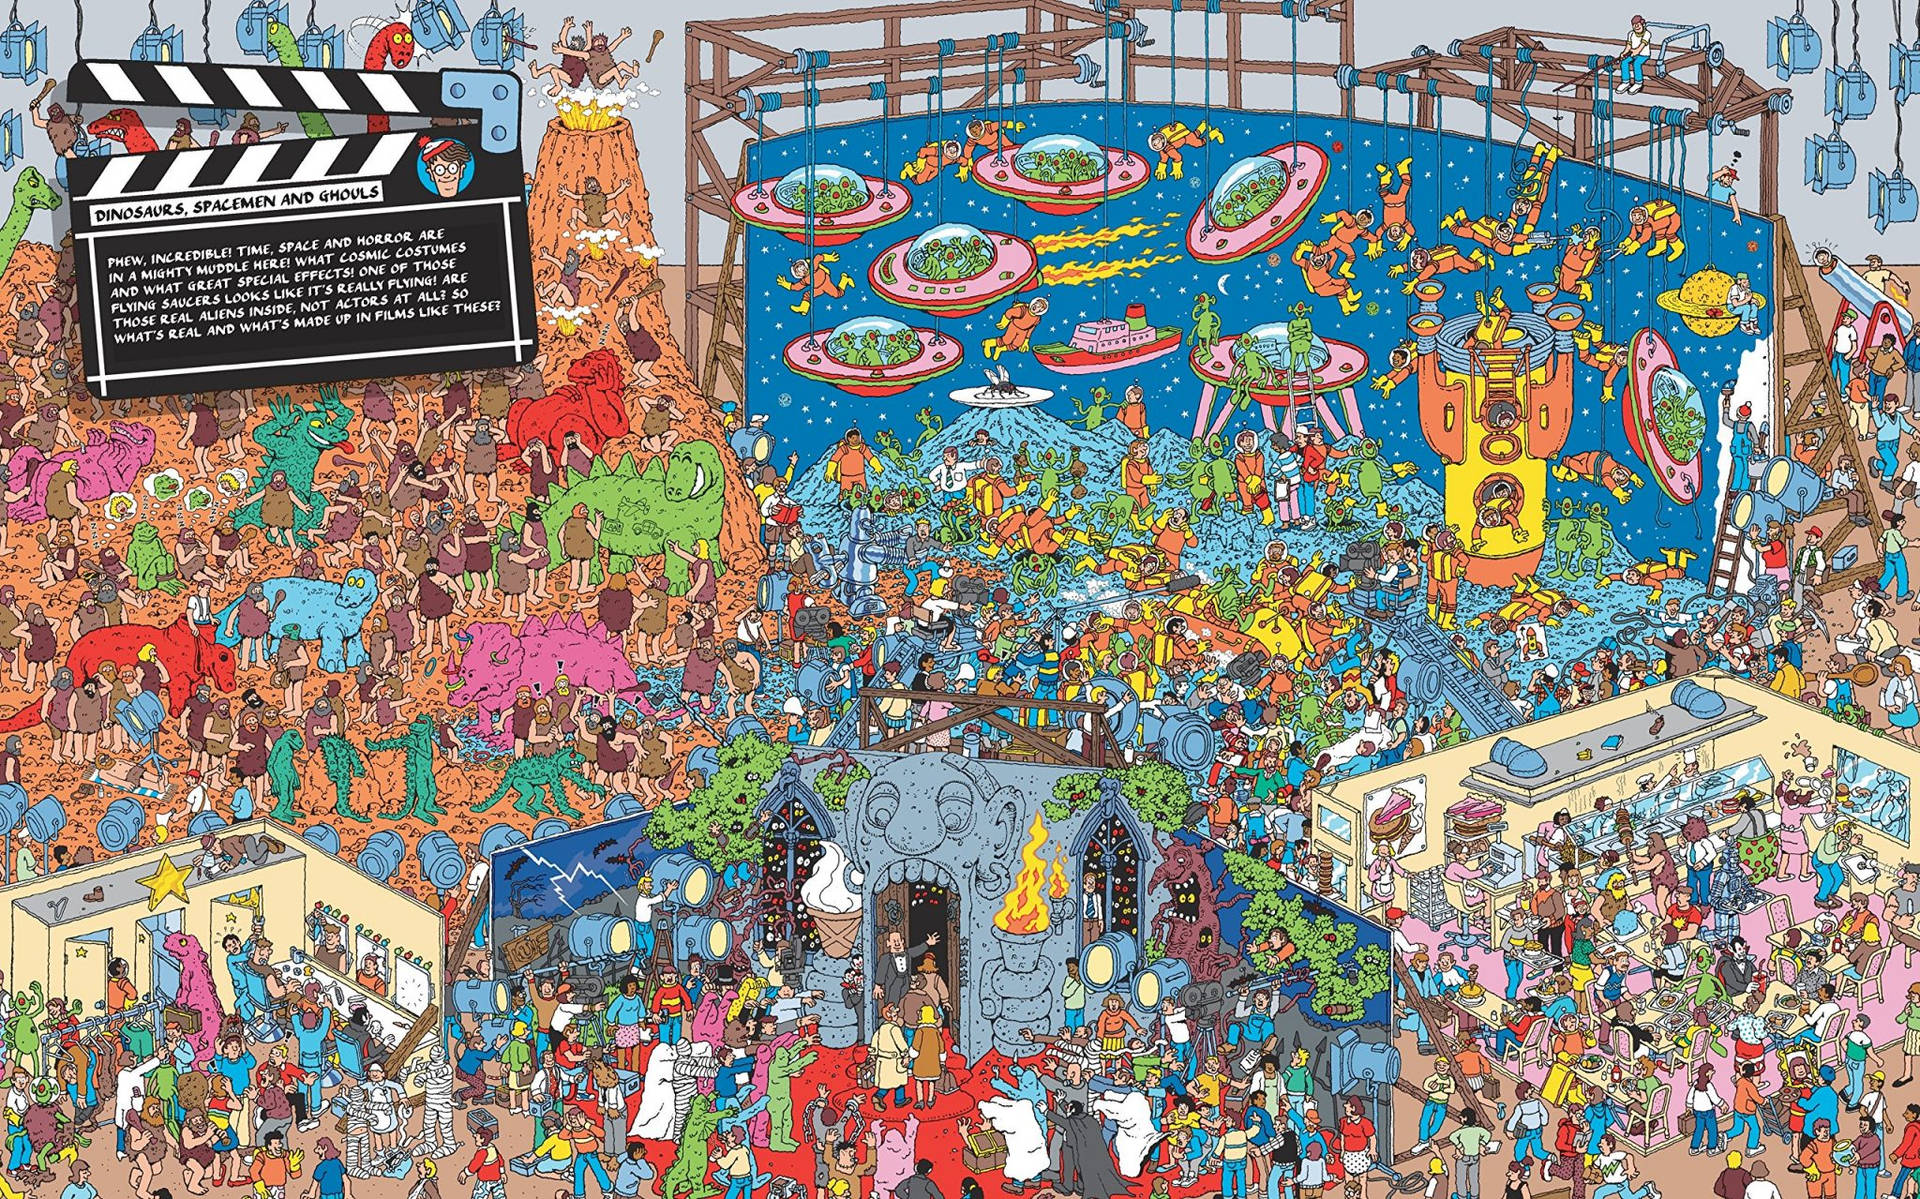 Where's Waldo Dinosaurs, Spacemen, And Ghouls Wallpaper